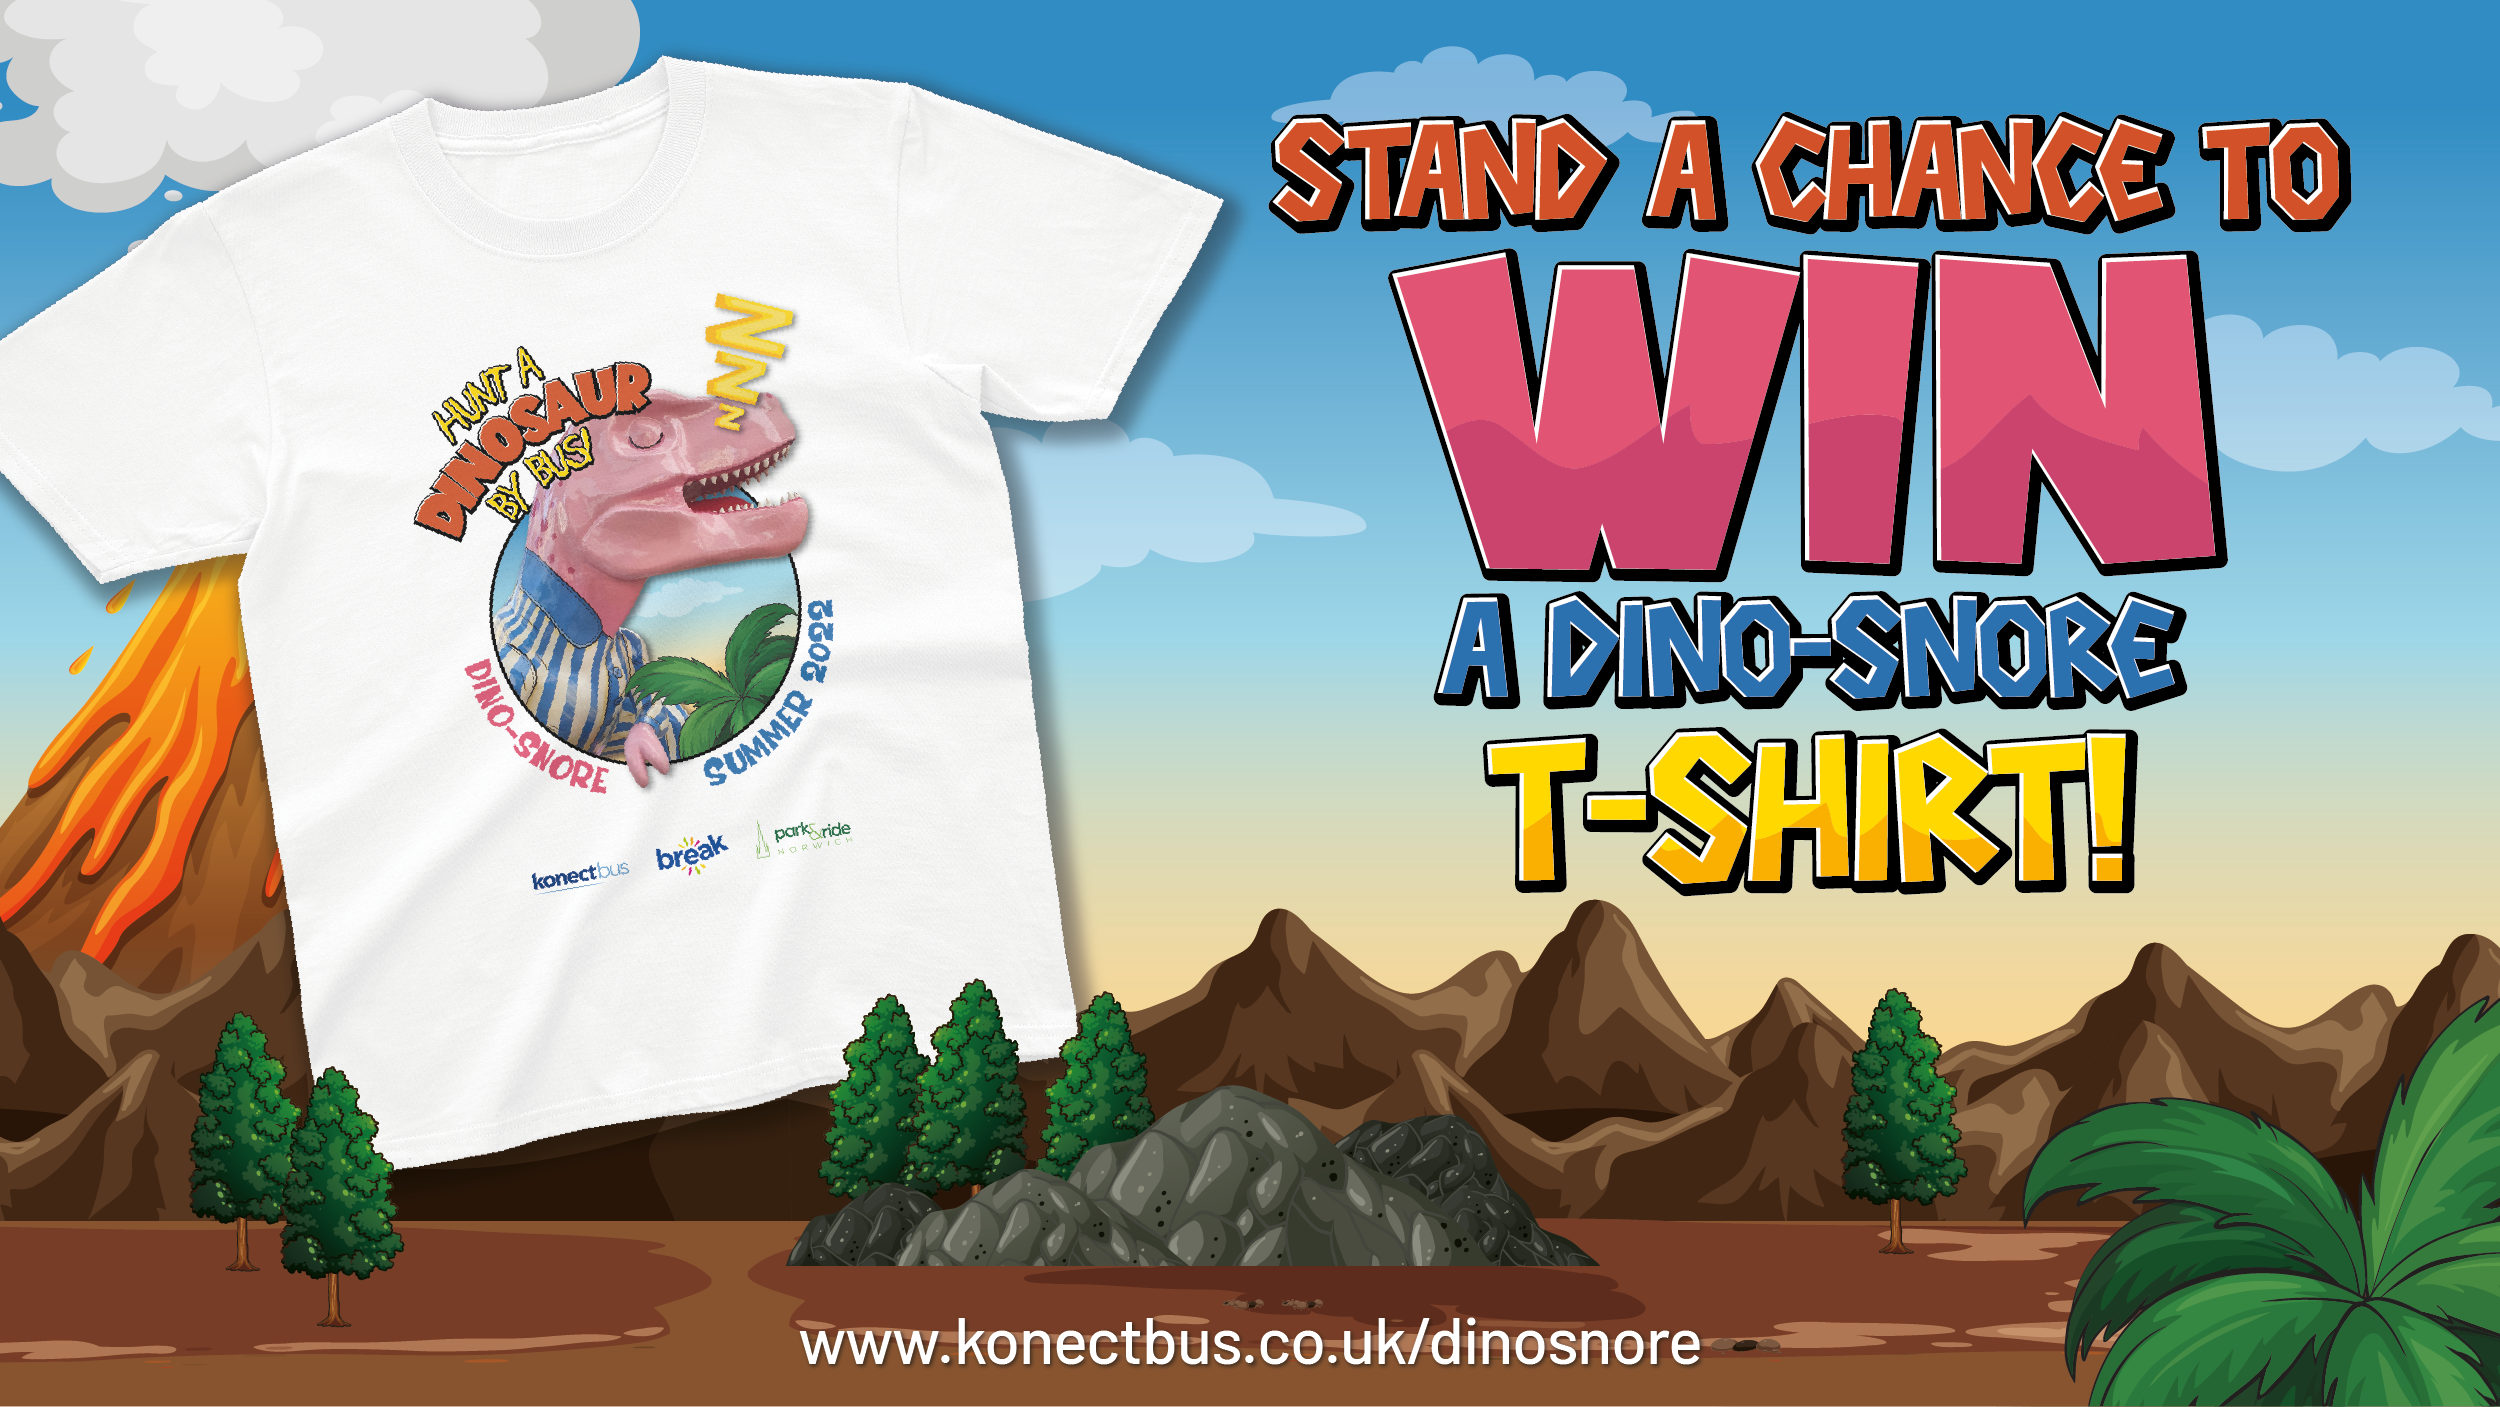 describes that you can stand a chance to win a dinosnore t shirt 